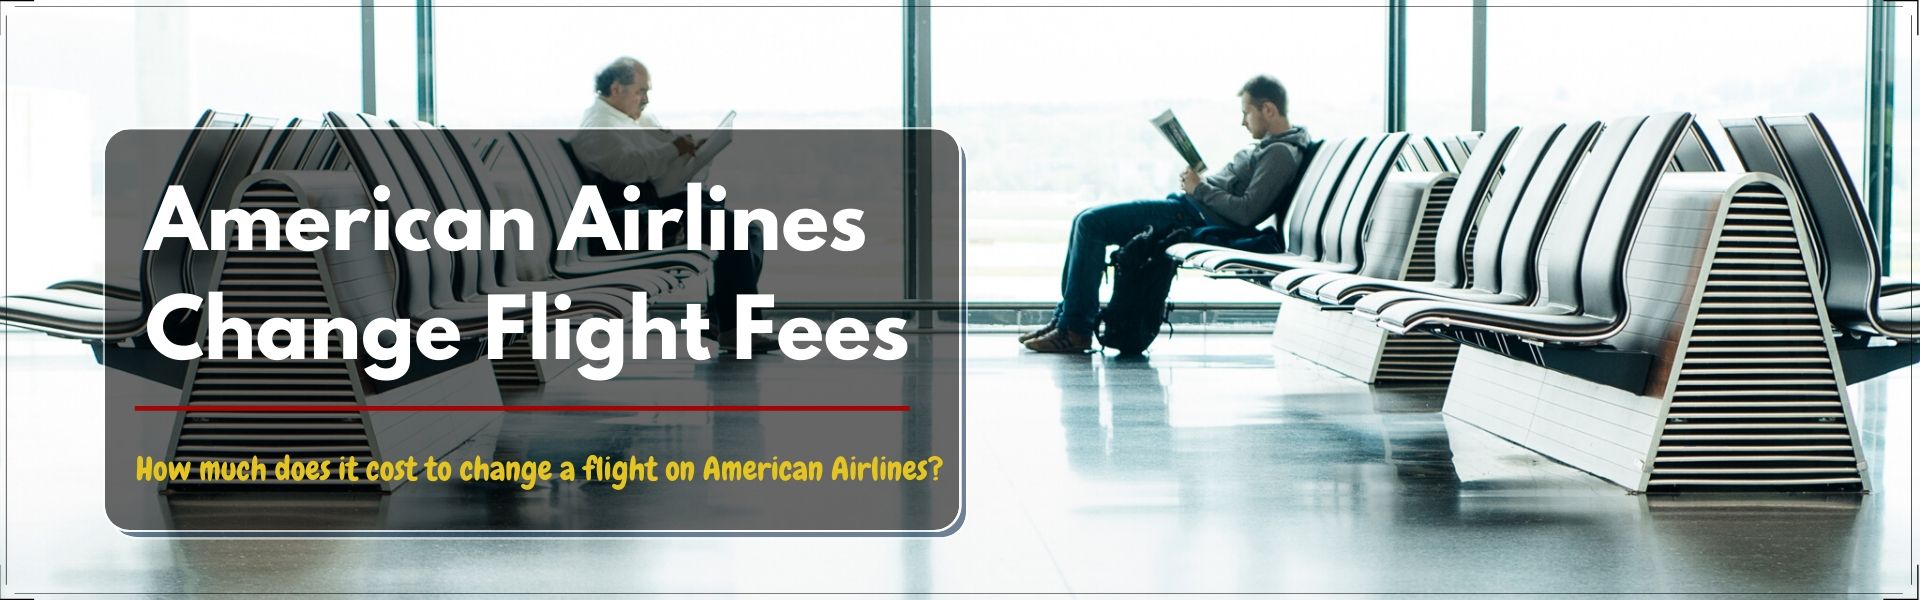 2020-06-15-06-56-43american airlines change fees